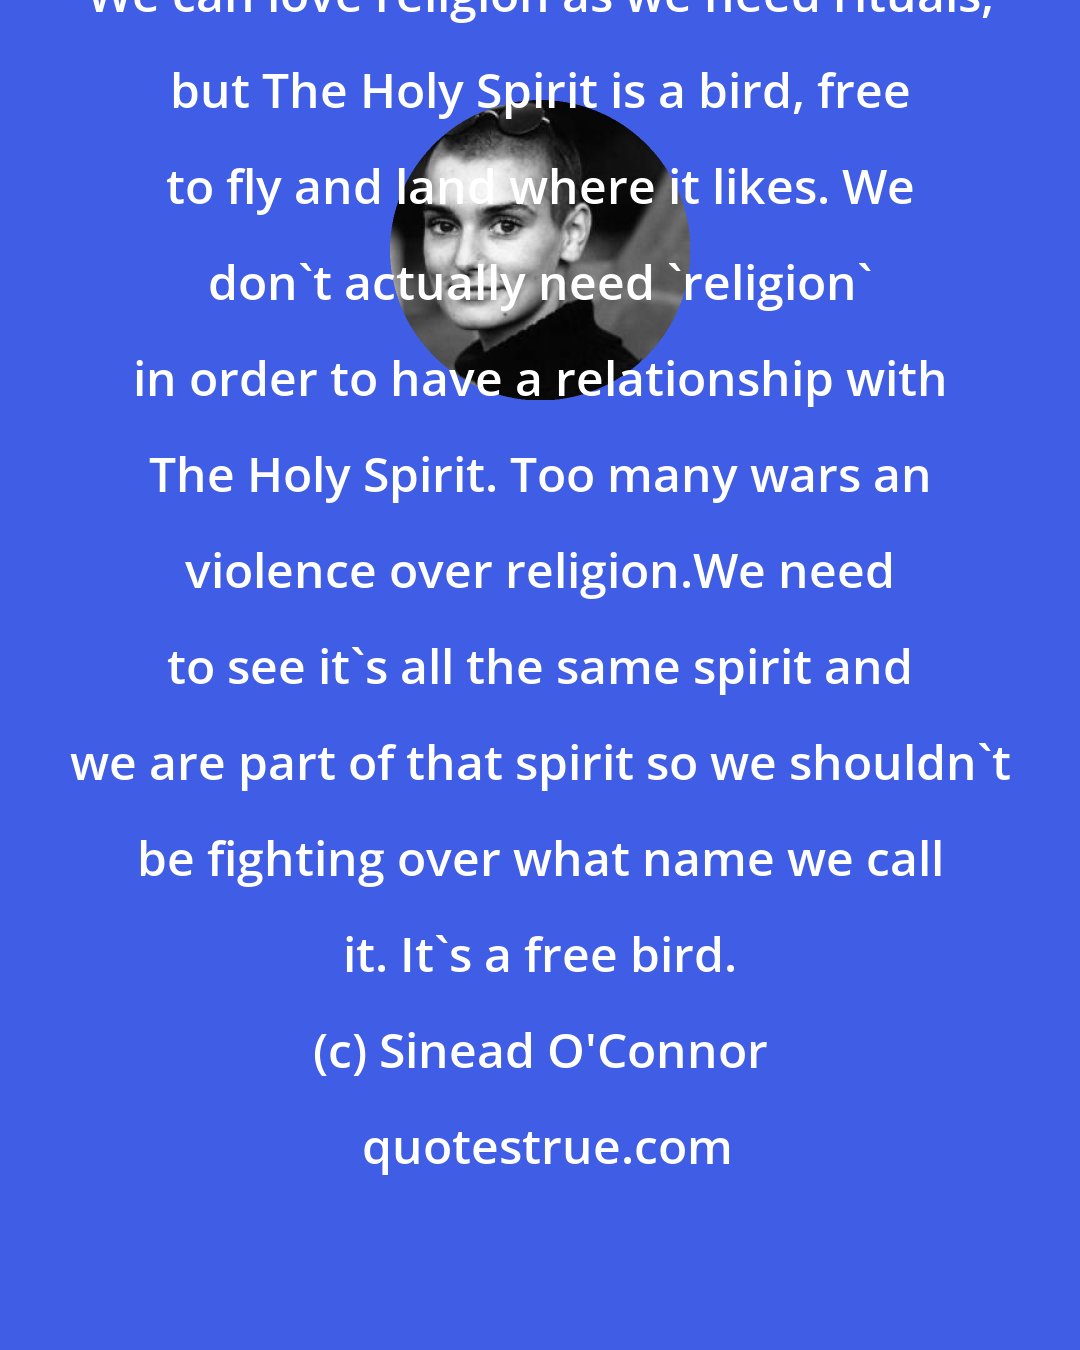 Sinead O'Connor: We can love religion as we need rituals, but The Holy Spirit is a bird, free to fly and land where it likes. We don't actually need 'religion' in order to have a relationship with The Holy Spirit. Too many wars an violence over religion.We need to see it's all the same spirit and we are part of that spirit so we shouldn't be fighting over what name we call it. It's a free bird.